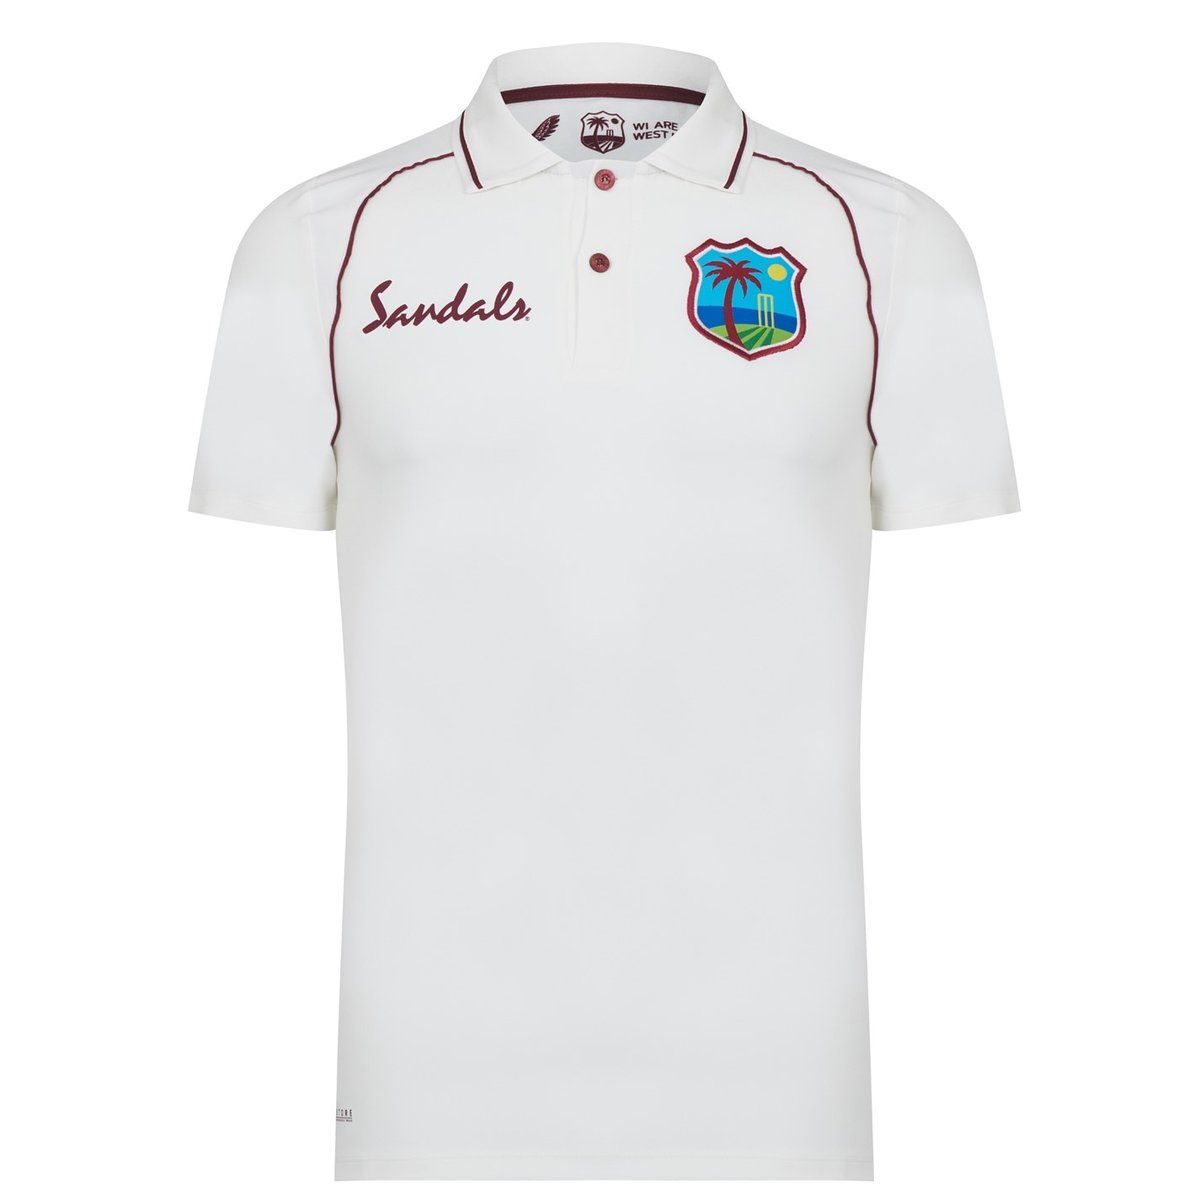 NEW West Indies Training and Test Kit: NOW AVAILABLE! | Windies Cricket news